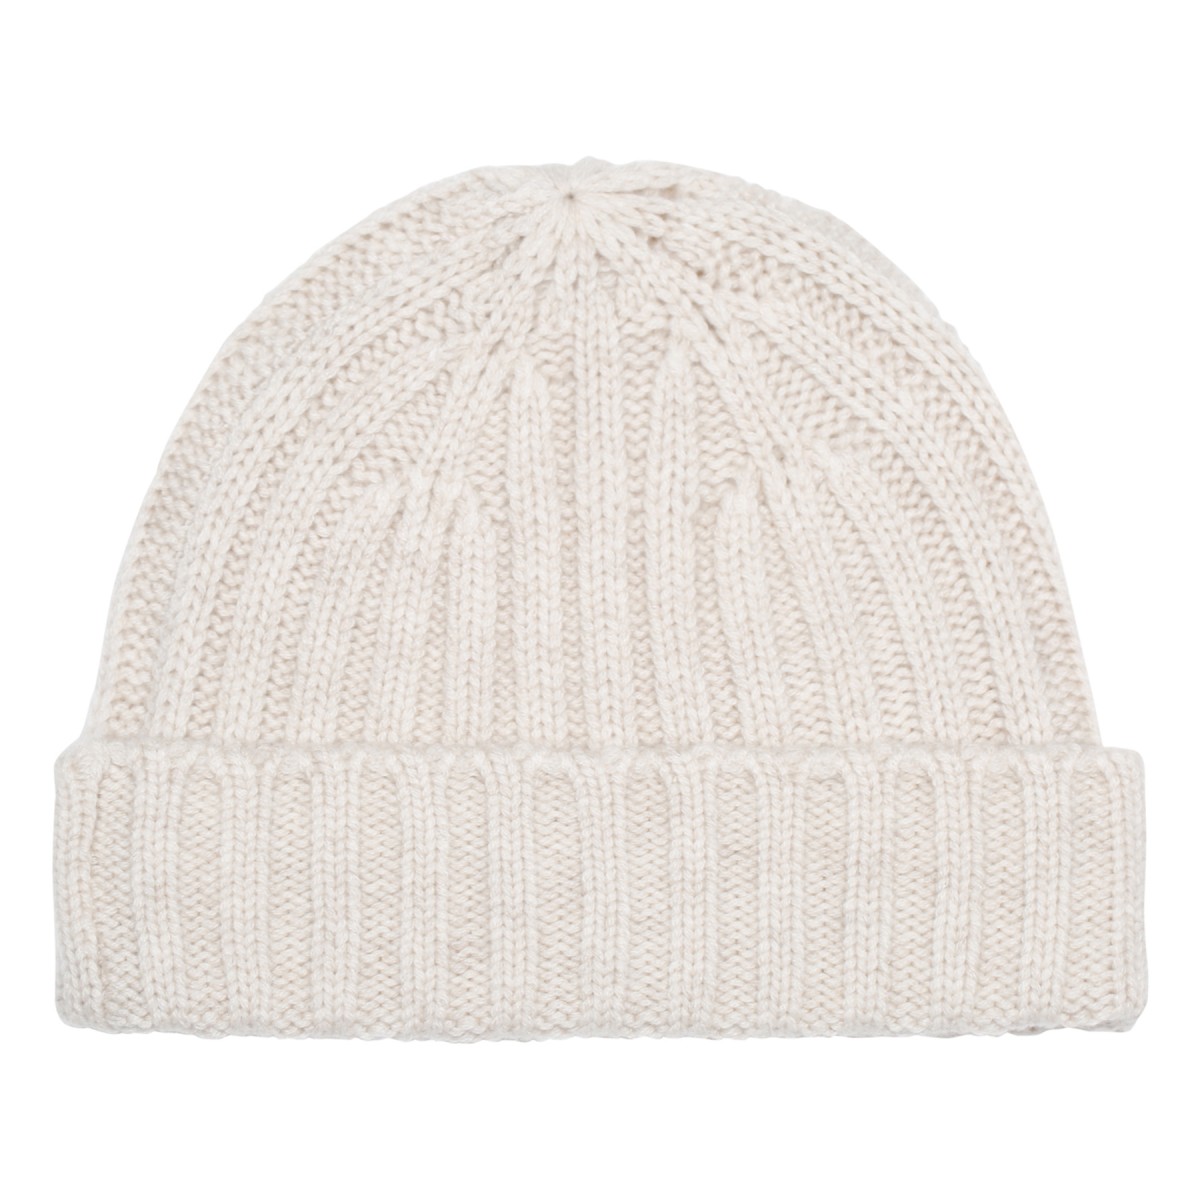 White ribbed cashmere beanie